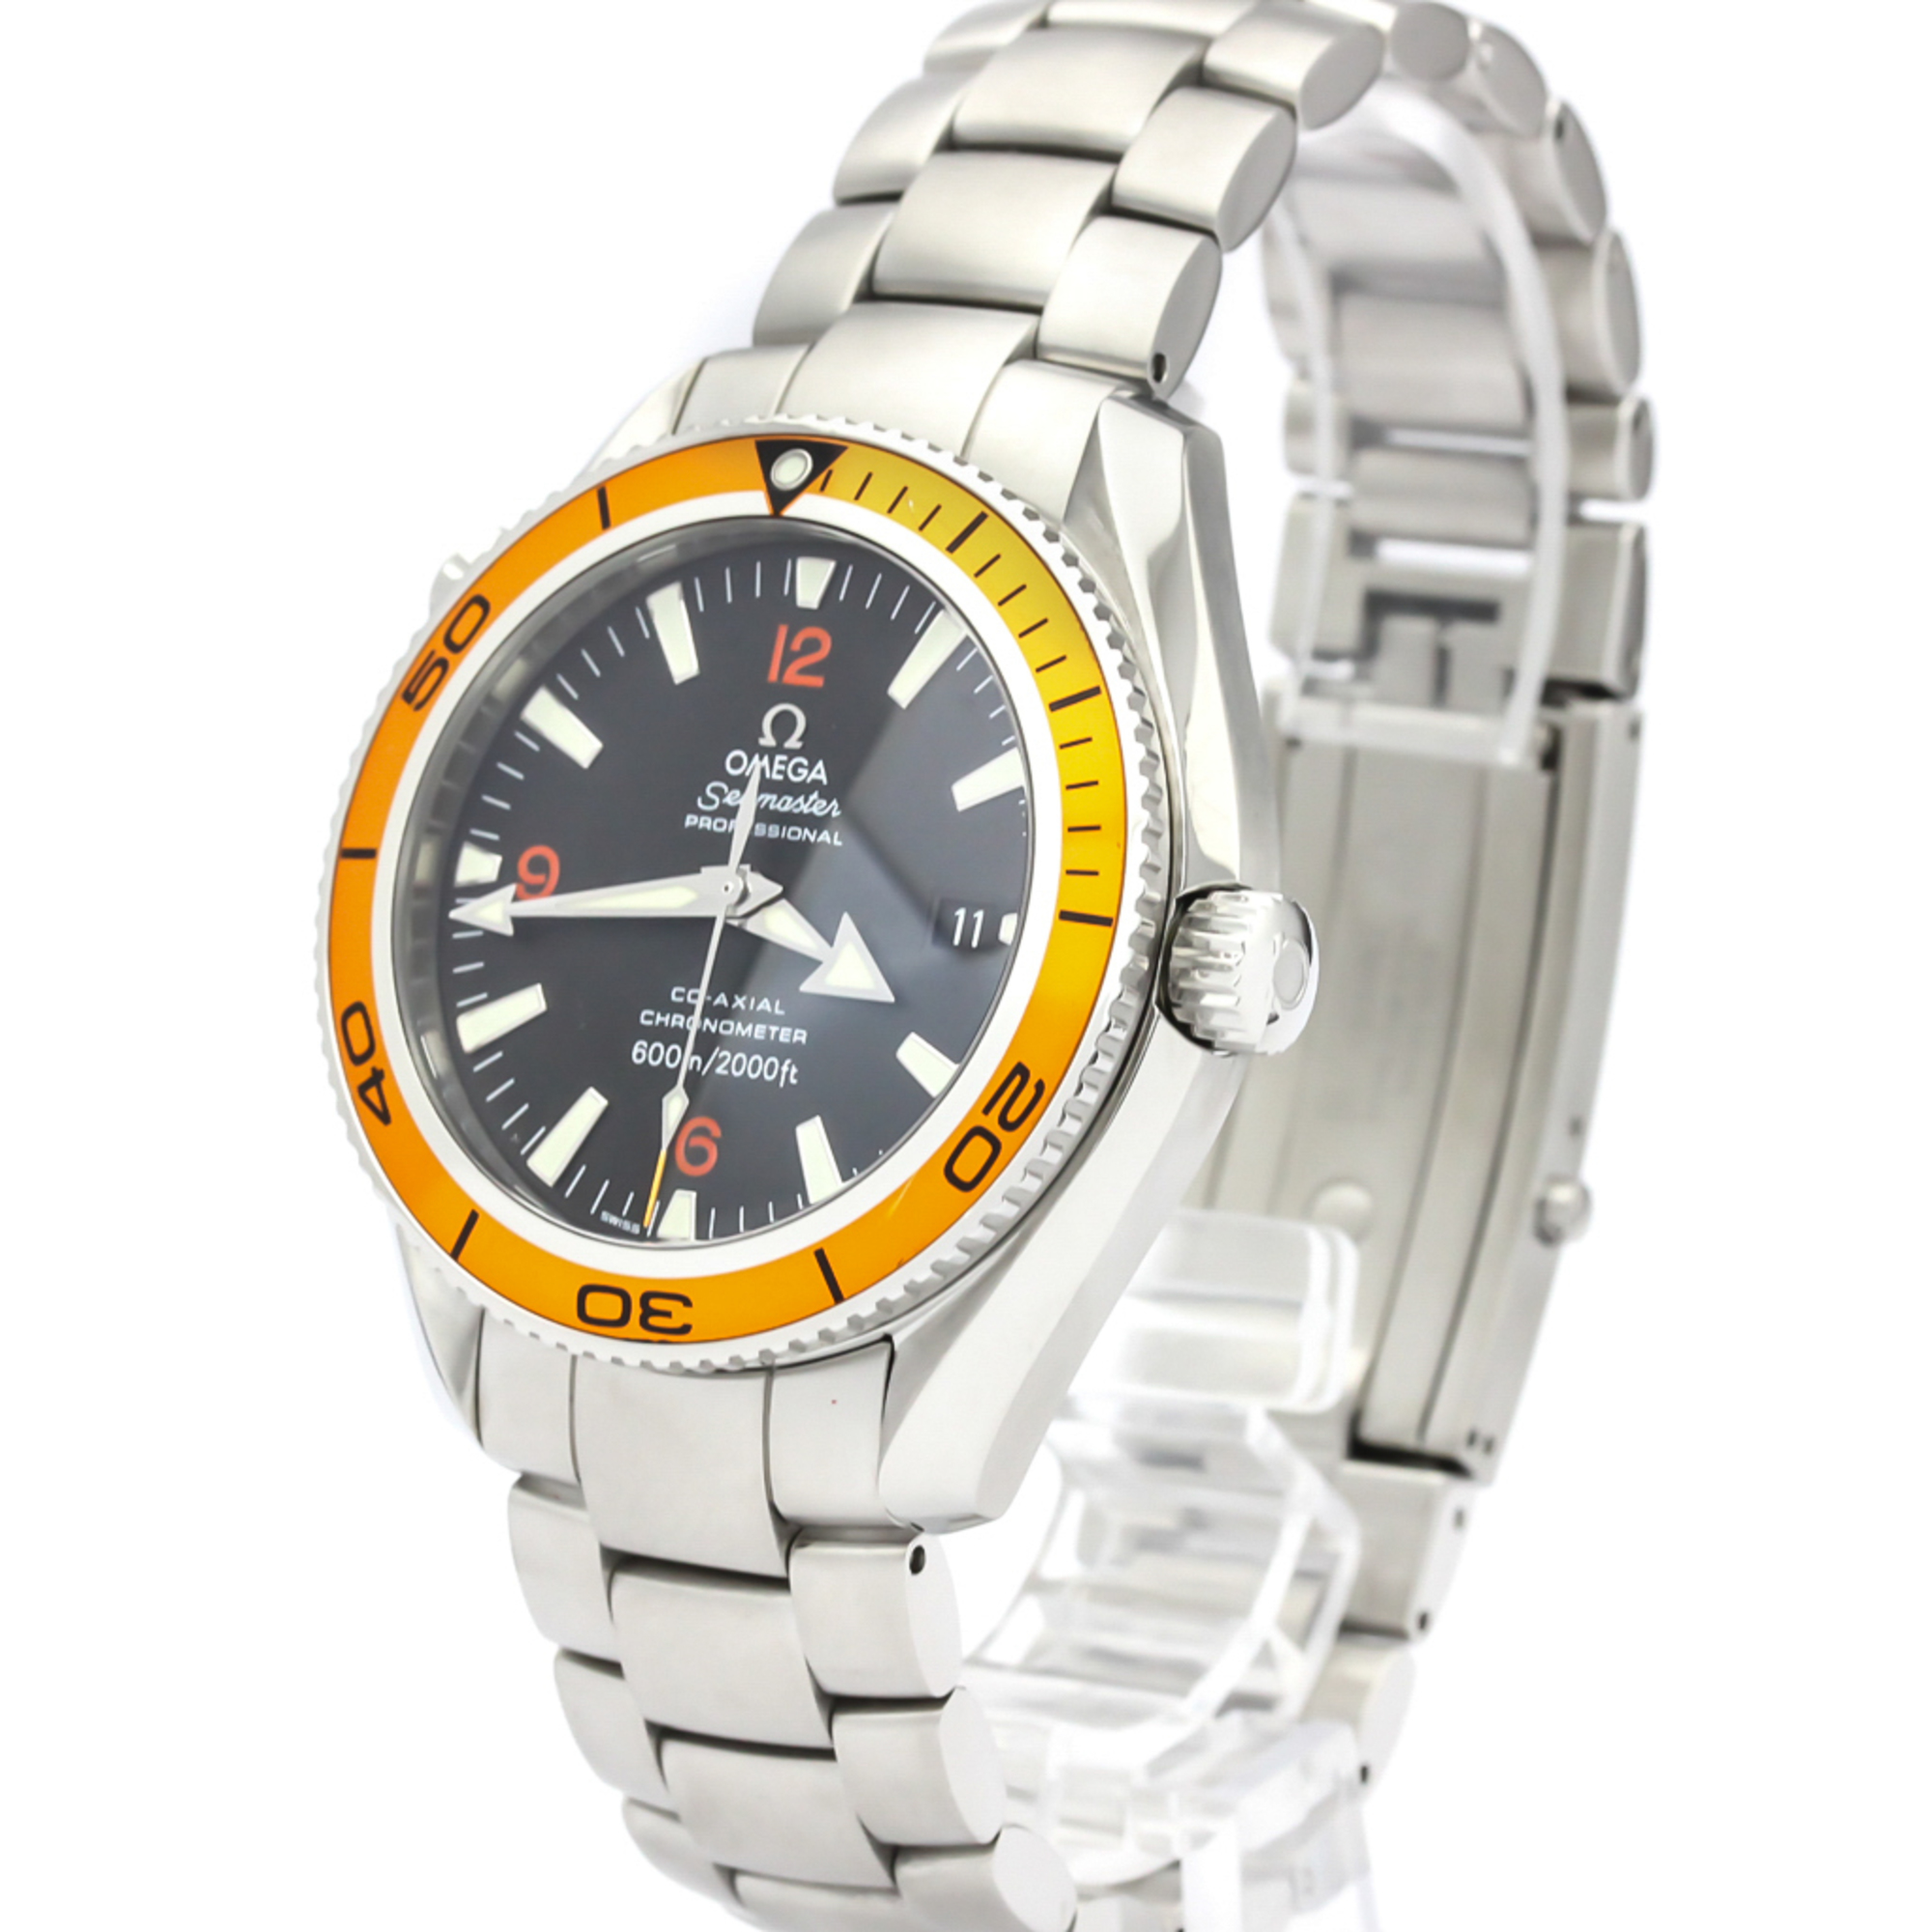 OMEGA Seamaster Planet Ocean Co-Axial Automatic Watch 2209.50